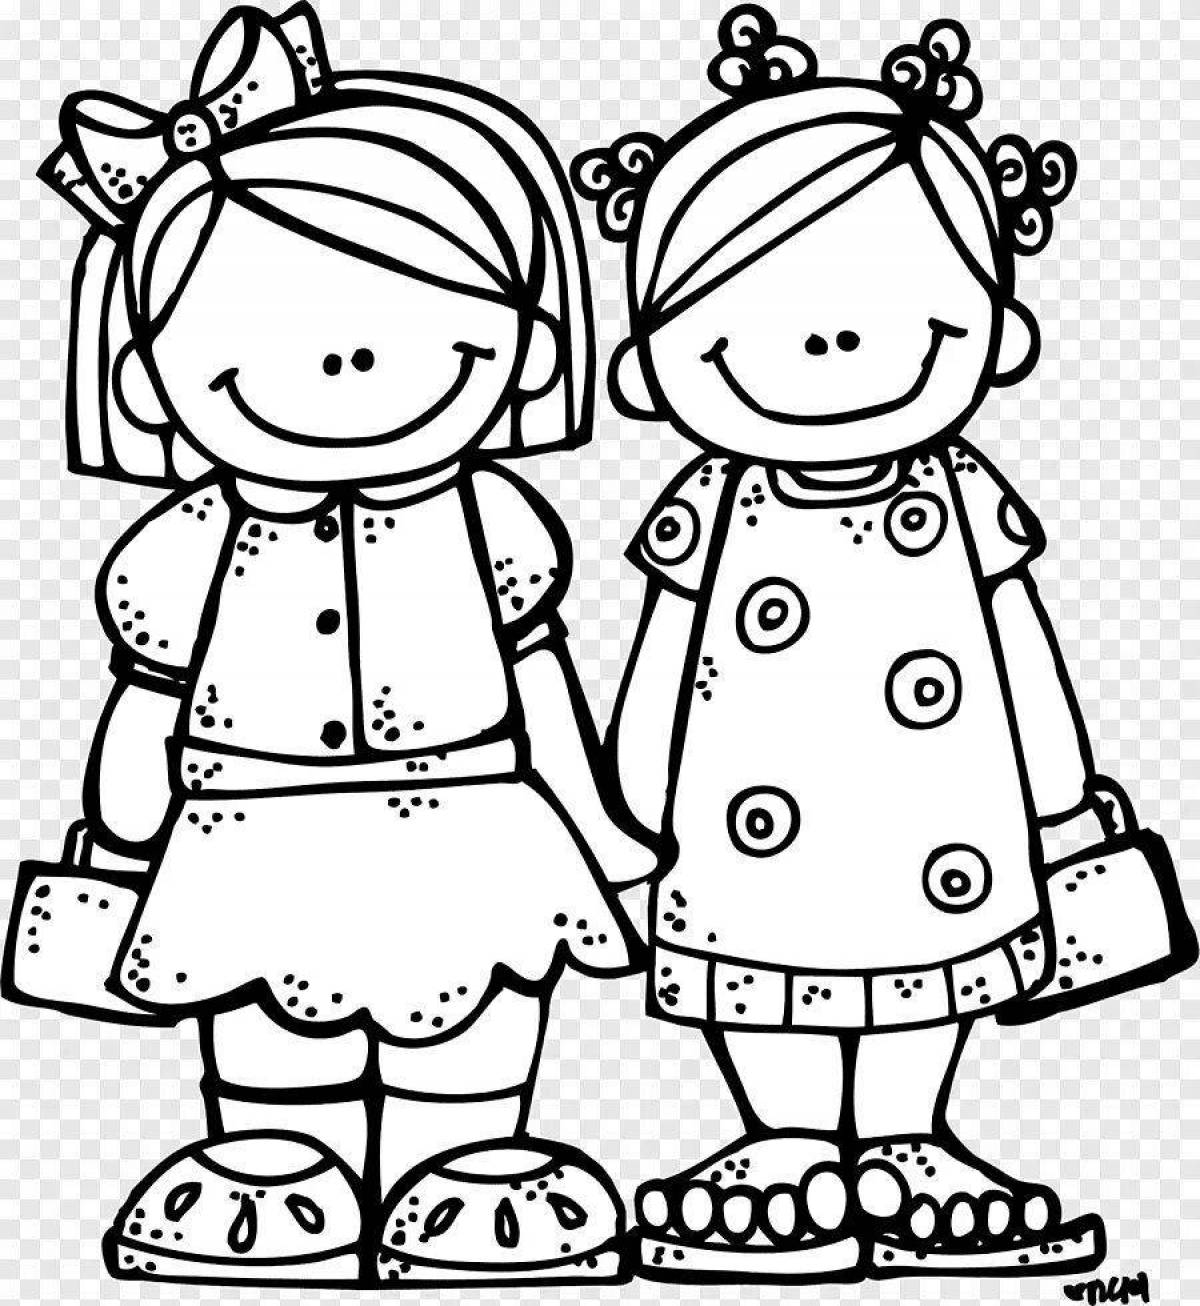 Adorable cartoon sisters coloring pages